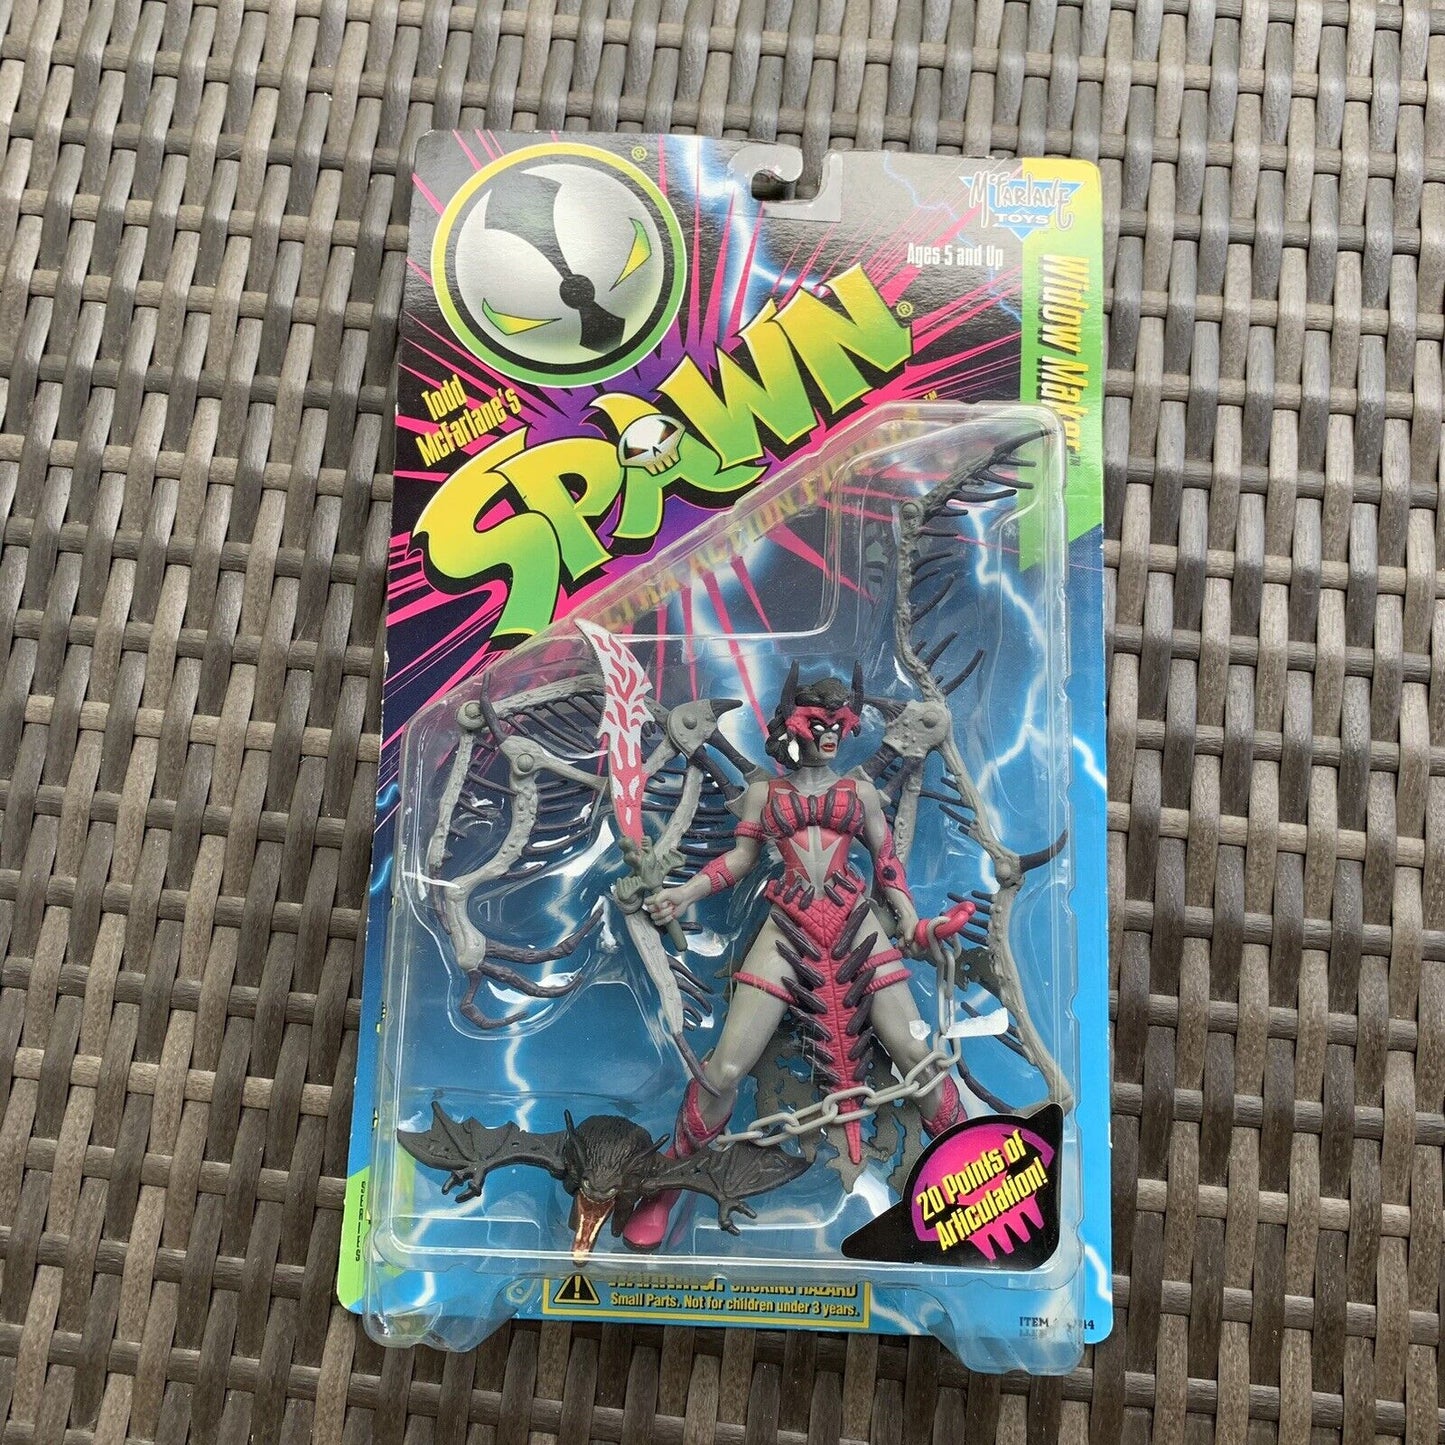 1996 McFarlane Toys "WIDOW MAKER" Spawn ULTRA-ACTION FIGURE Series 5 NEW!!!